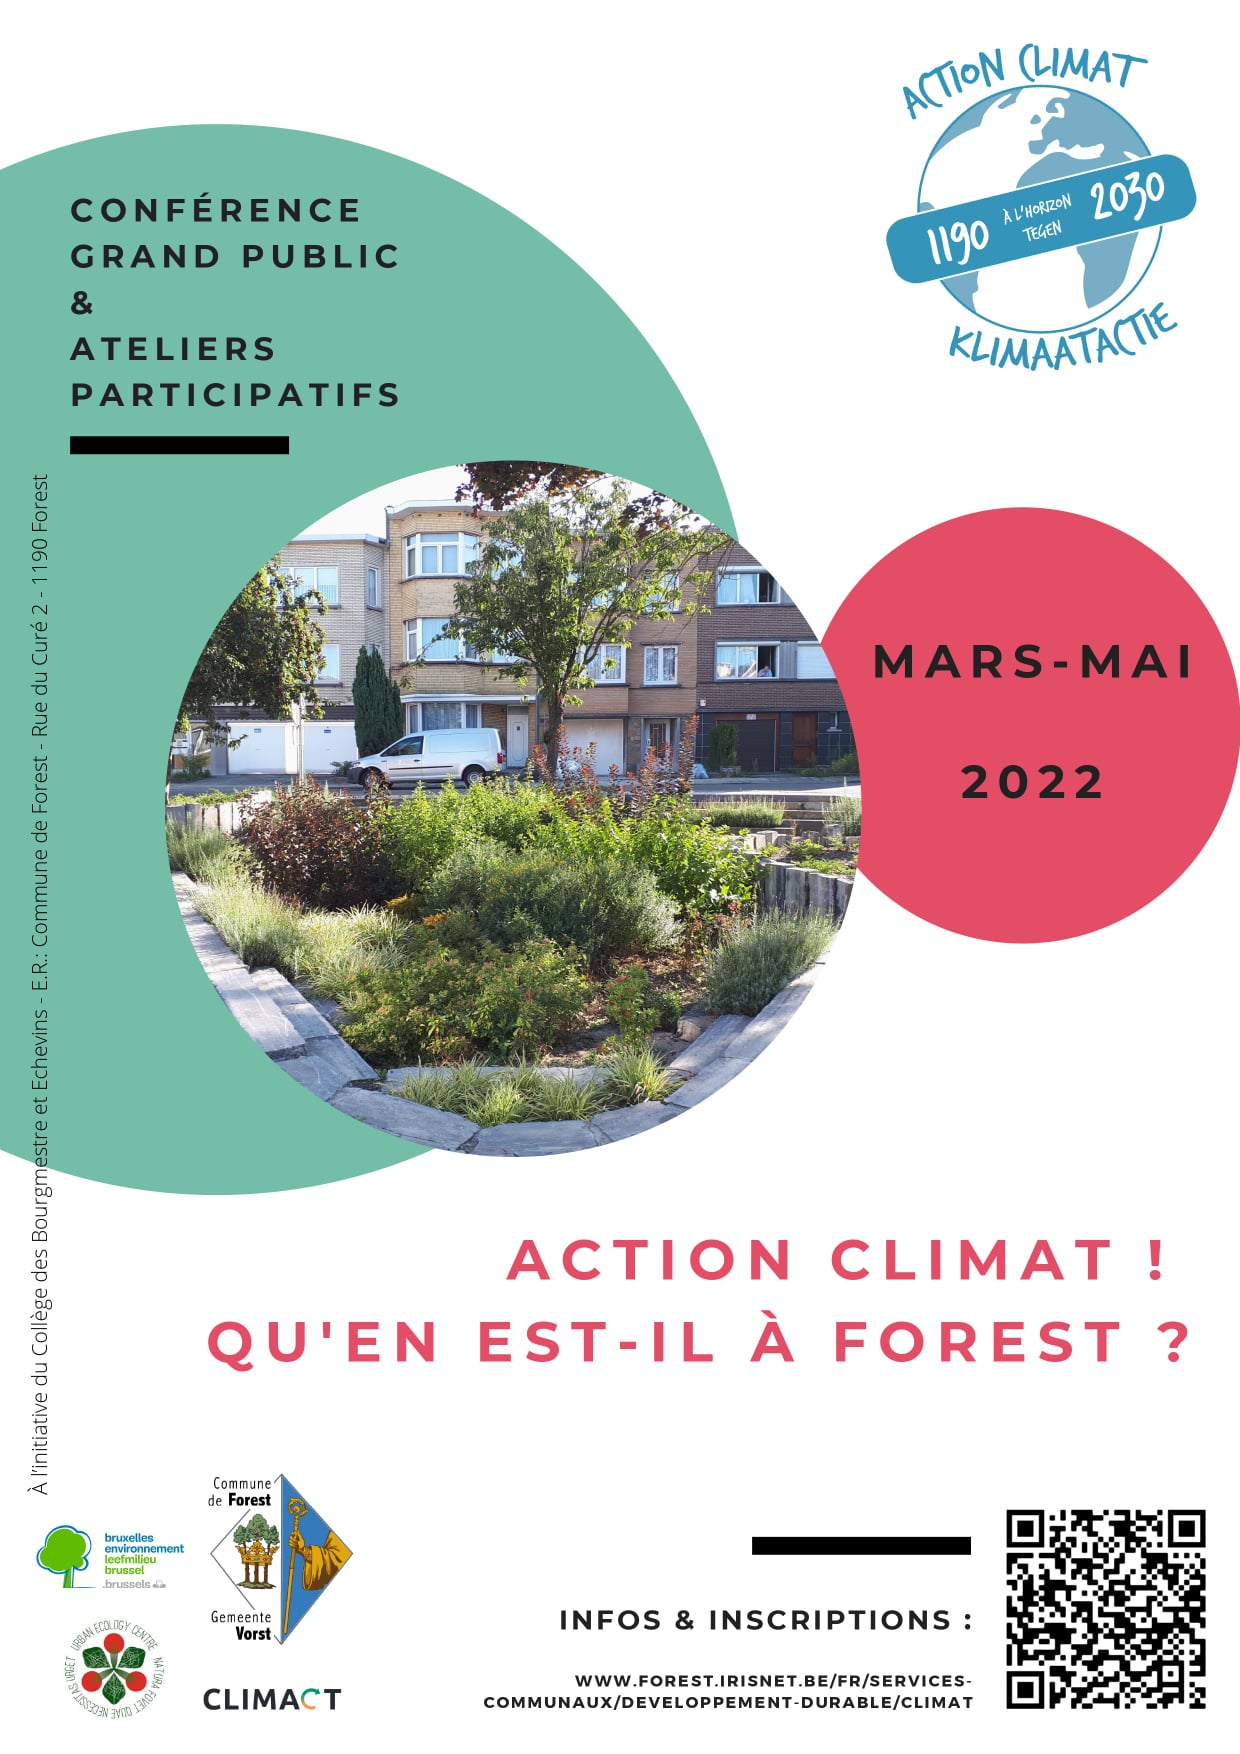 PAC Affiche conférence & ateliers 2022